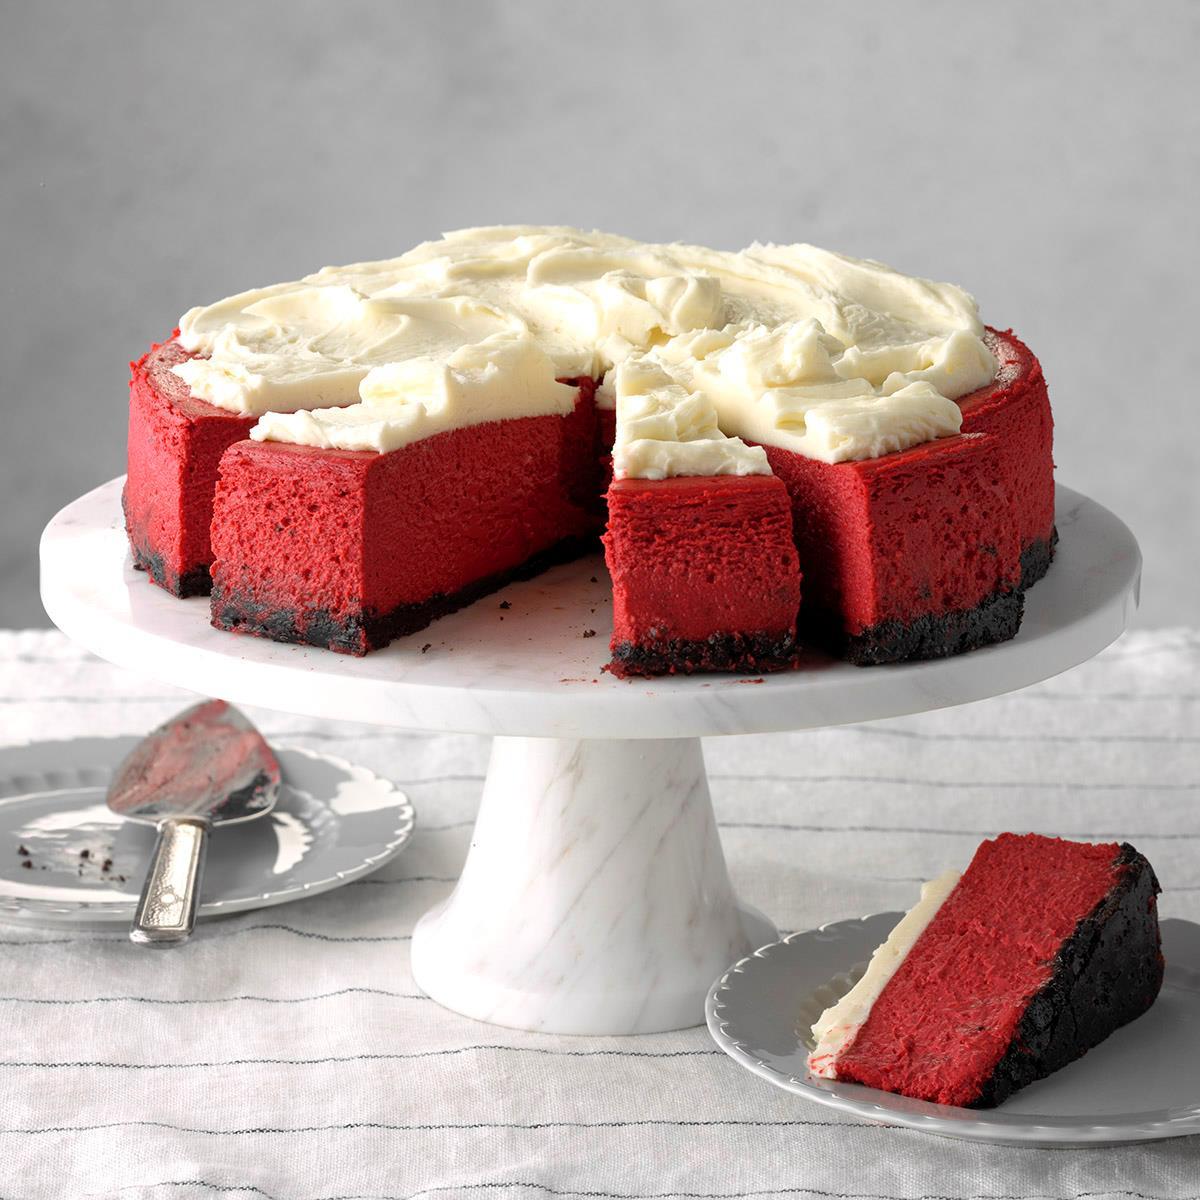 Red Cheesecake Recipe: to Make It